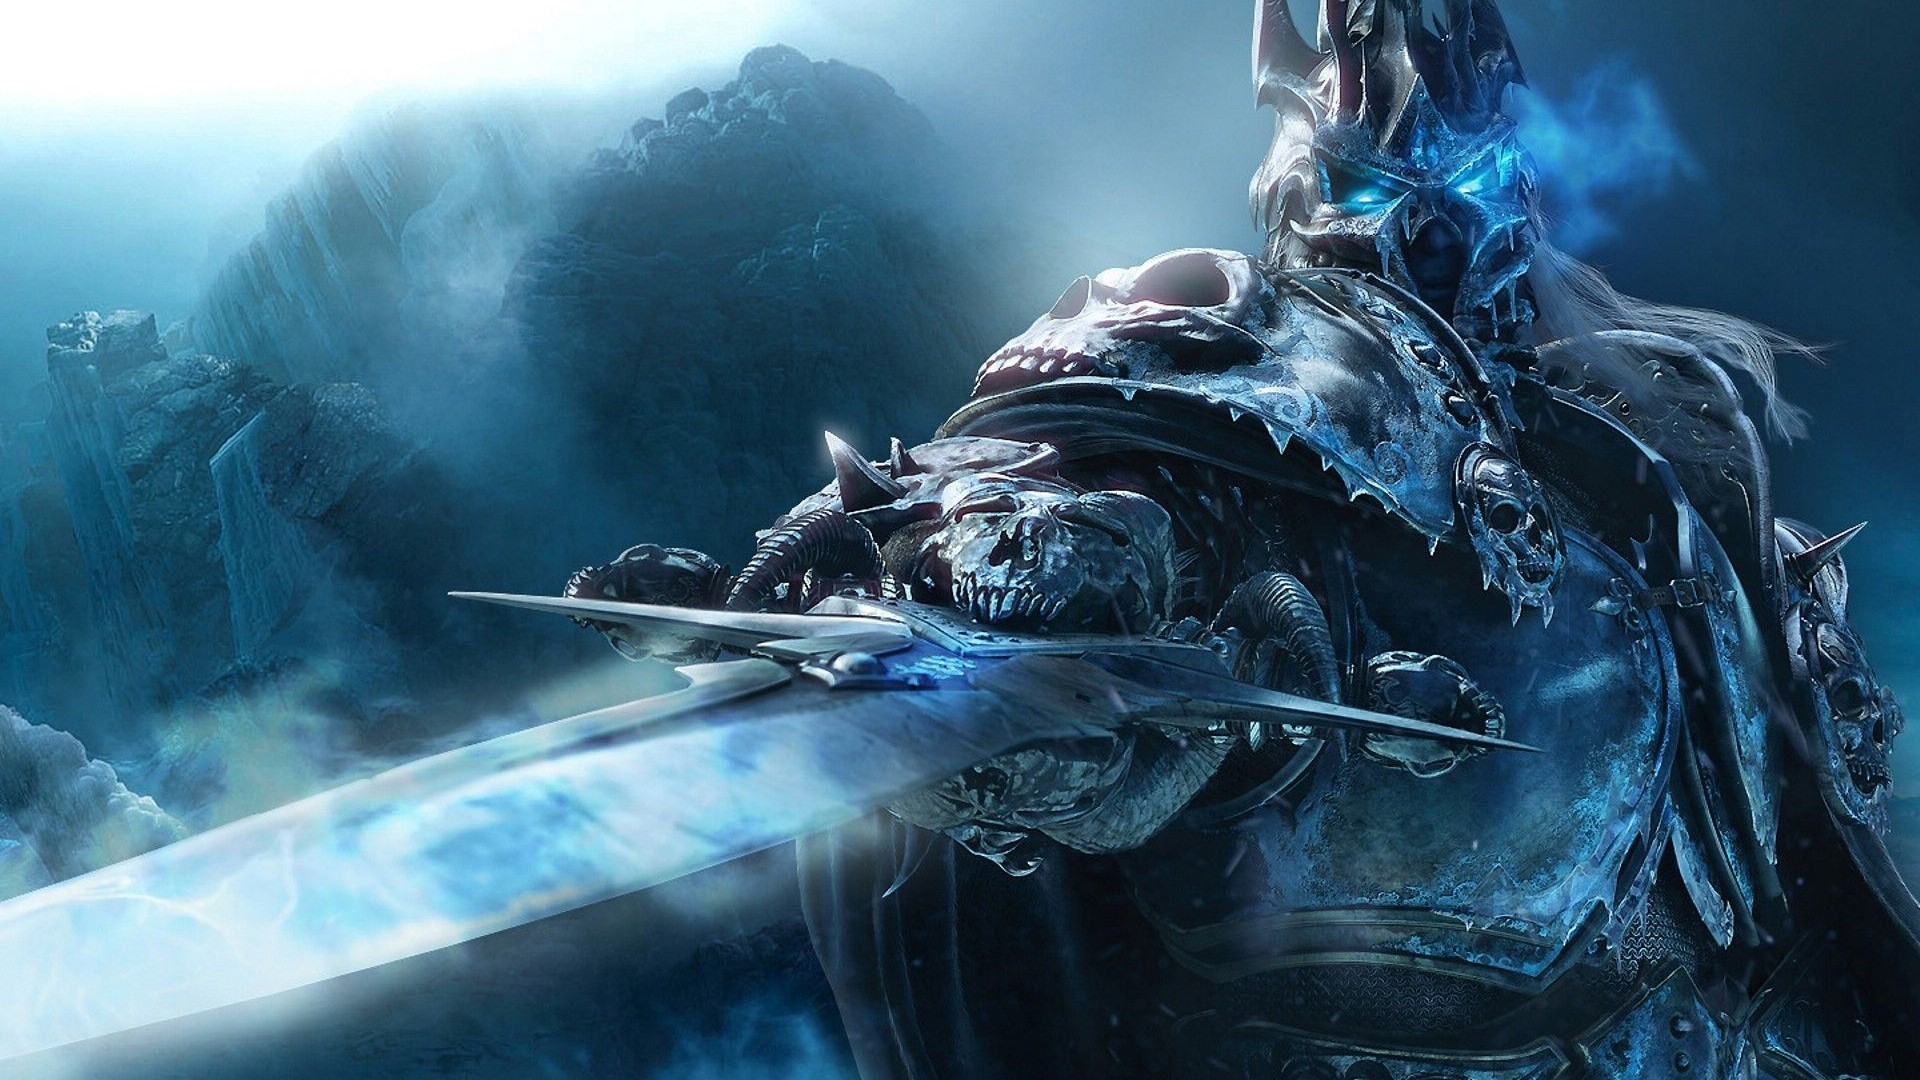 1920x1080 Page 3: Full HD 1080p Games Wallpapers, Desktop Backgrounds HD | Adorable  Wallpapers | Pinterest | Lich king and Wallpaper